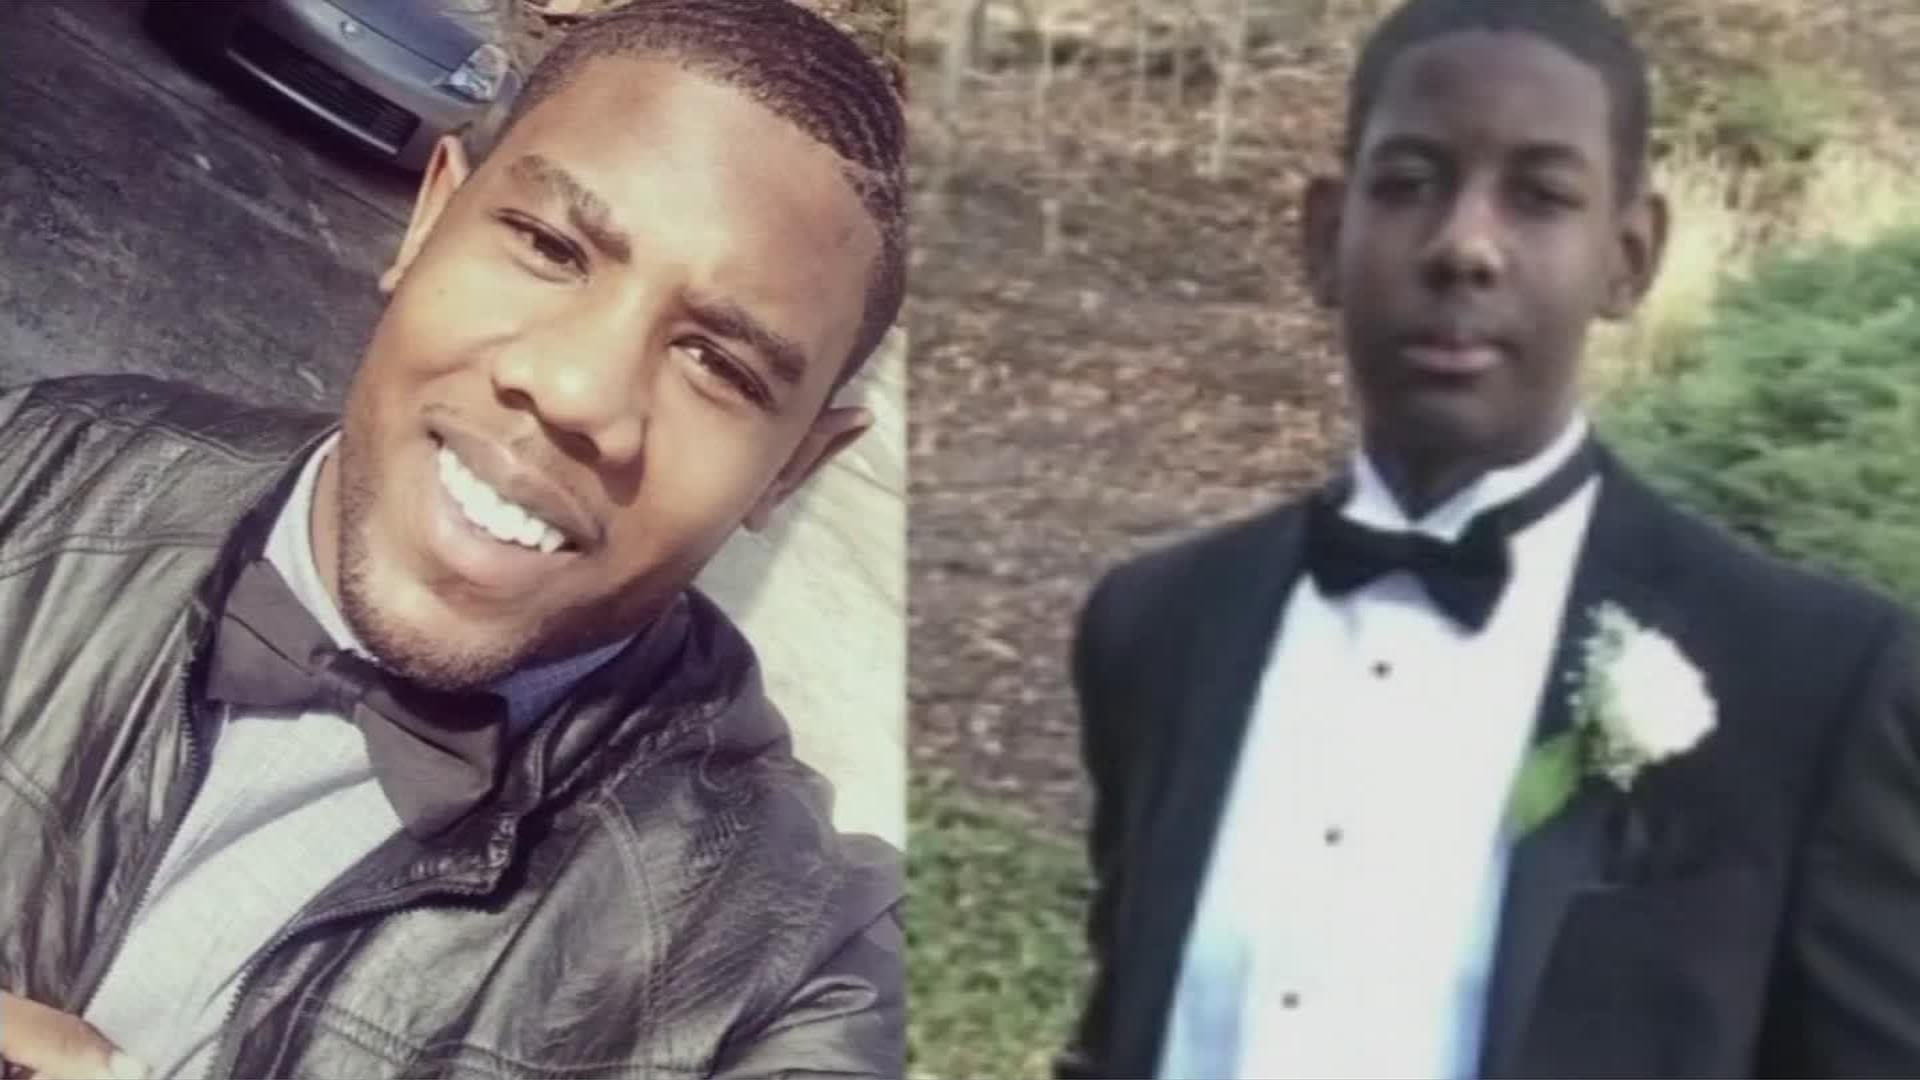 Friend charged with murder in deaths of Gwinnett brothers